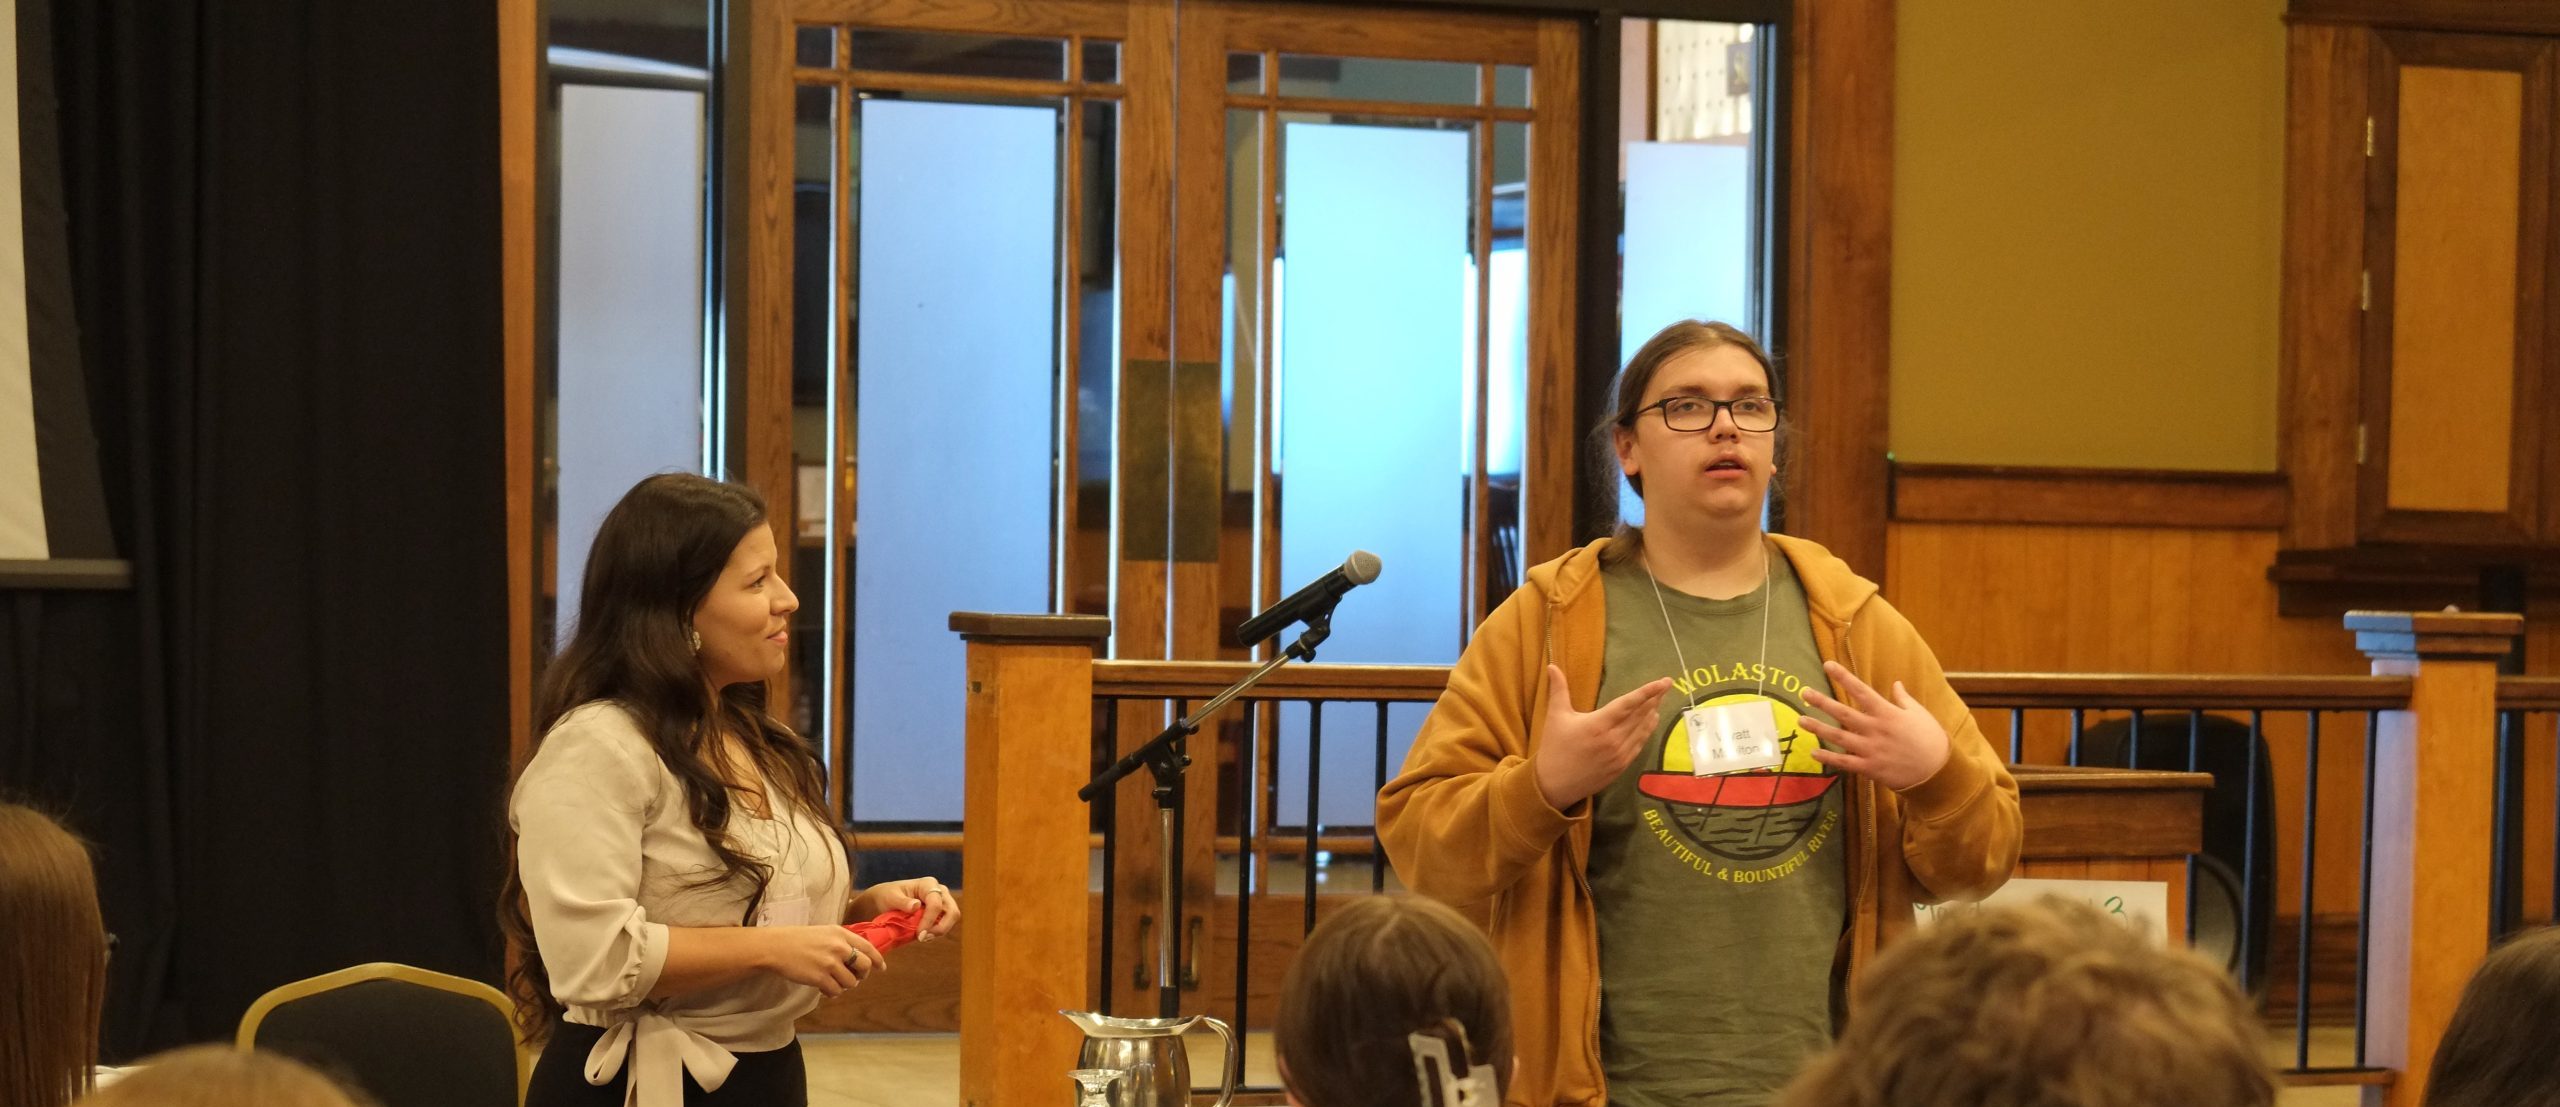 Sarah Francis, ASD-W Subject Coordinator for Curriculum & Instruction and First Nations Culture & Programs, listens as a student leader speaks to his fellow student leaders.